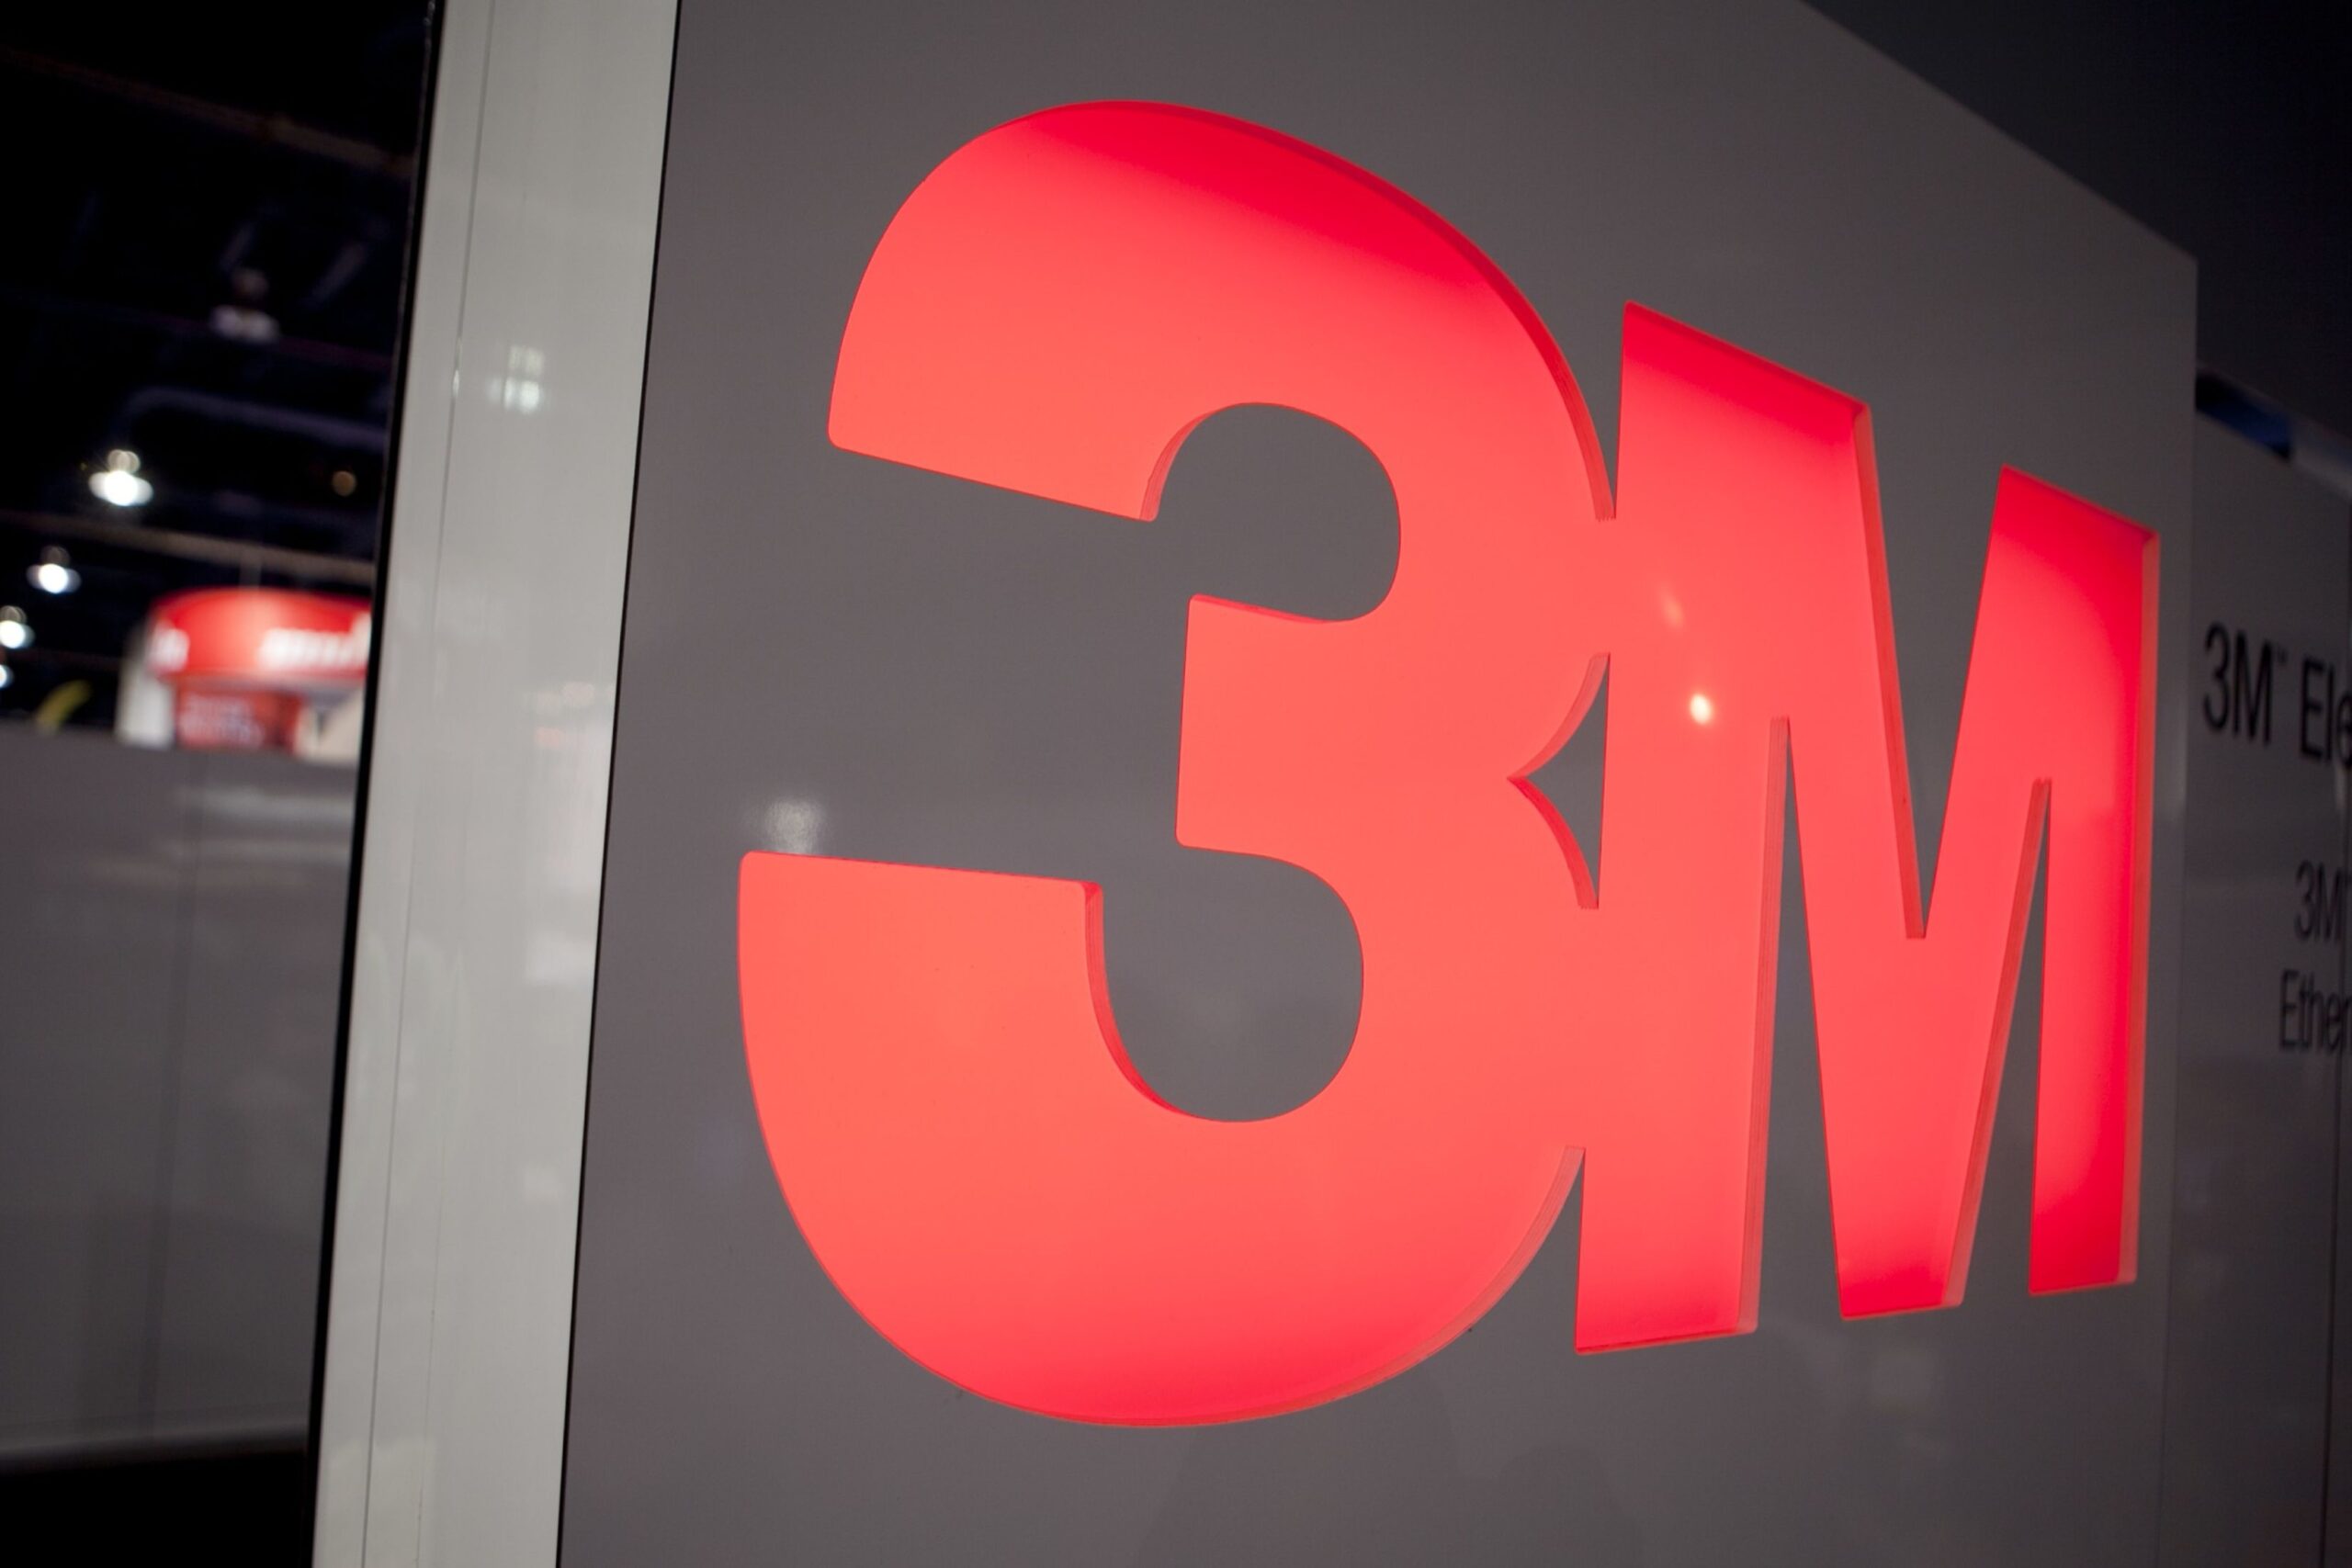 3M to Stop Making, Discontinue Use of 'Forever Chemicals' - WSJ